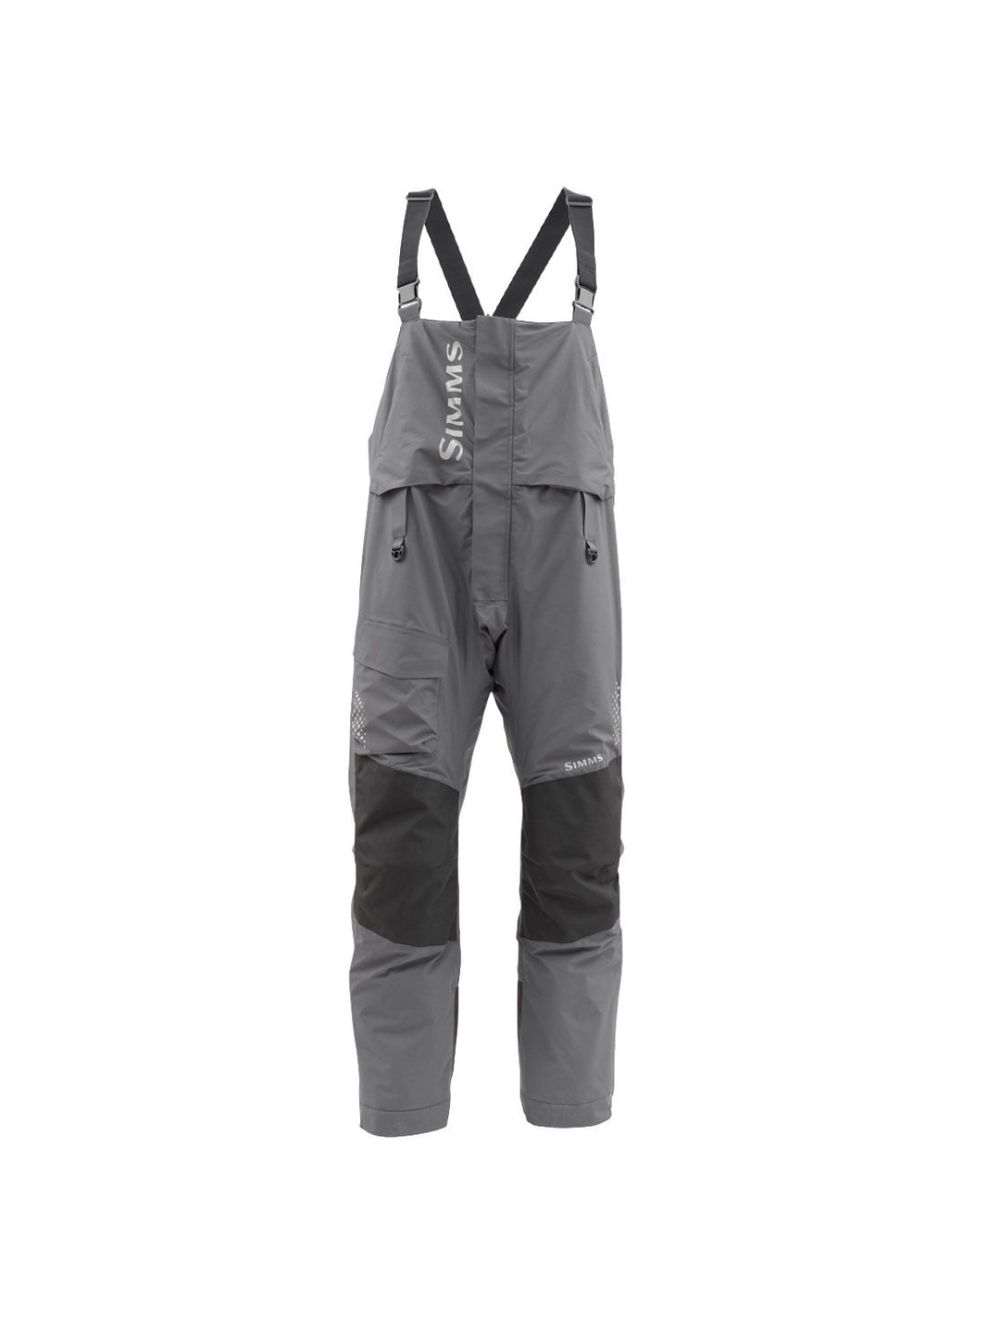 Simms Challenger Insulated Bib TheFlyStop